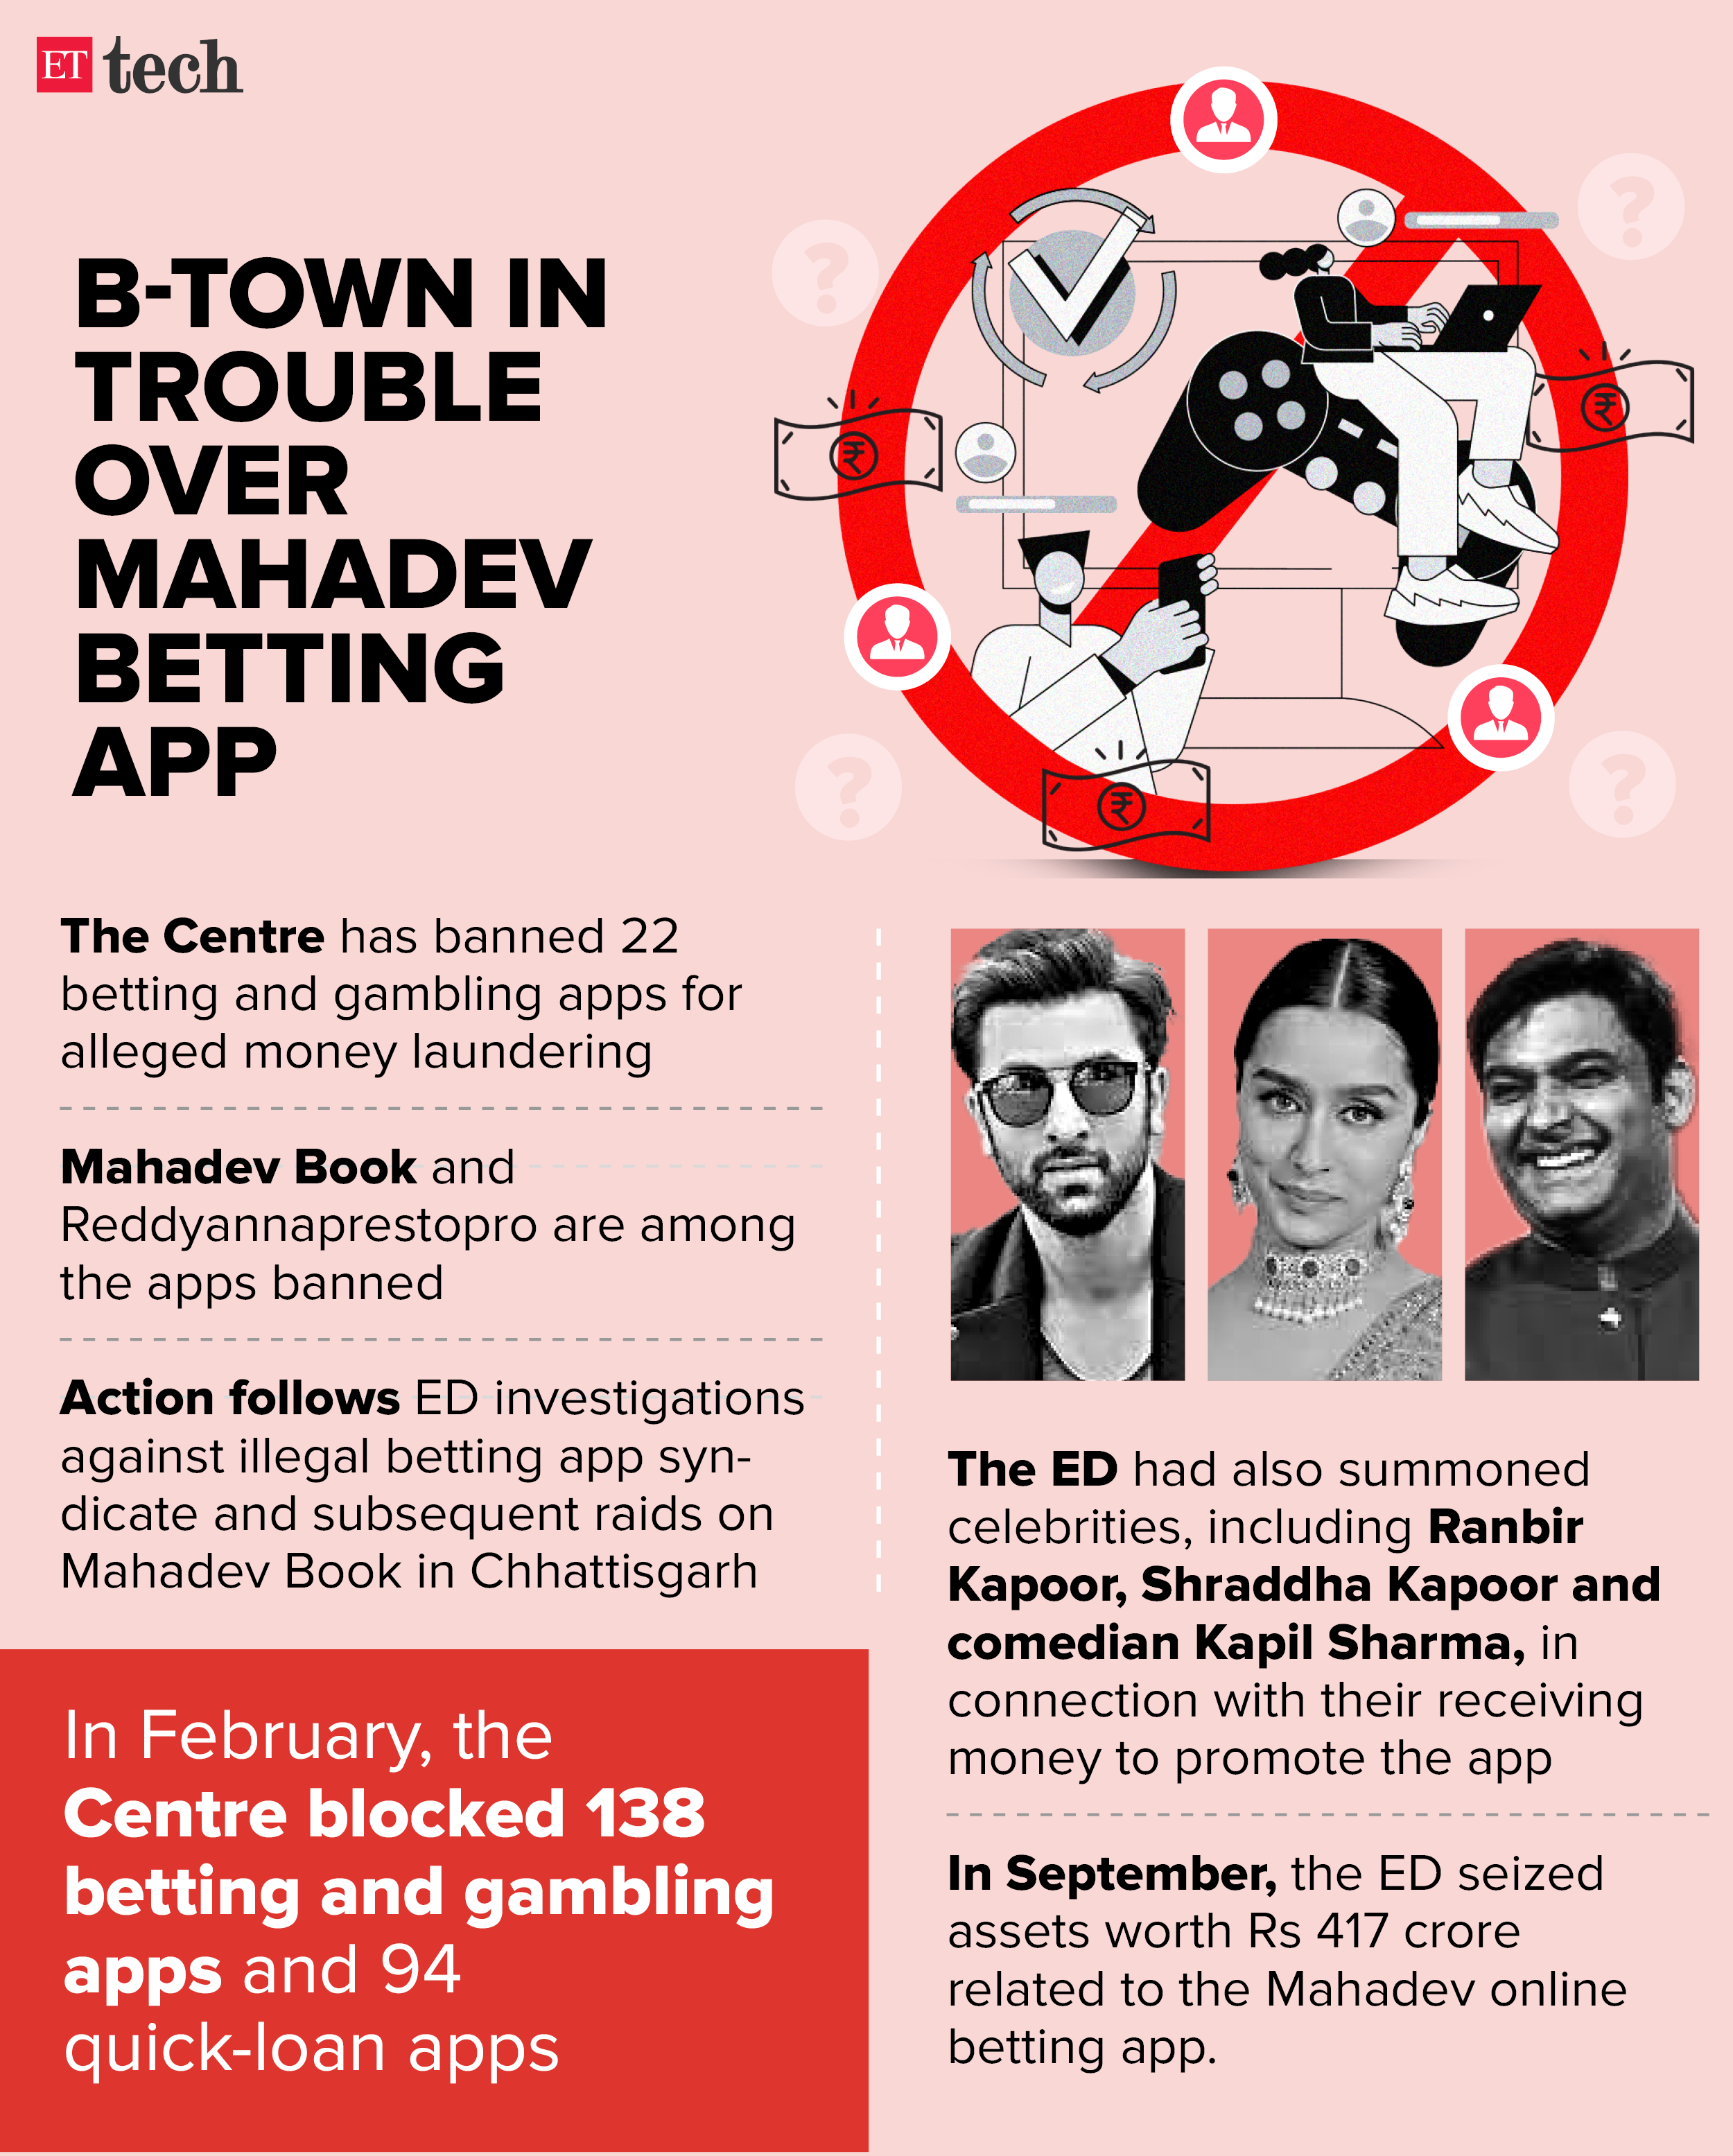 B-town in trouble over Mahadev betting app_Graphic_ETTECH_2